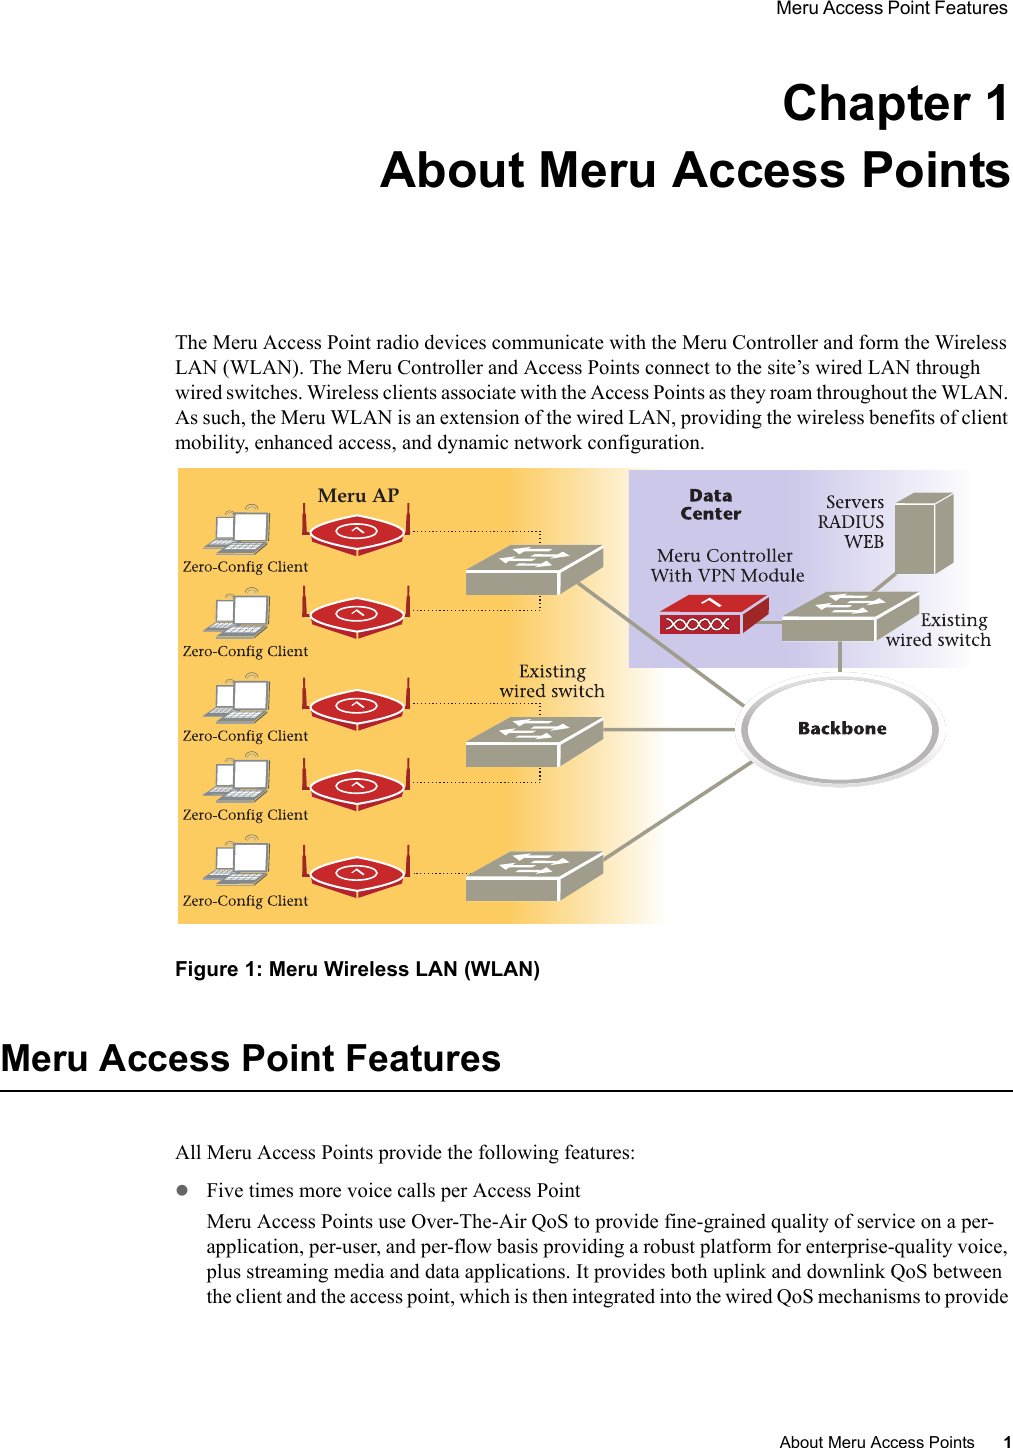  Meru Access Point Features About Meru Access Points 1 Chapter 1About Meru Access PointsThe Meru Access Point radio devices communicate with the Meru Controller and form the Wireless LAN (WLAN). The Meru Controller and Access Points connect to the site’s wired LAN through wired switches. Wireless clients associate with the Access Points as they roam throughout the WLAN. As such, the Meru WLAN is an extension of the wired LAN, providing the wireless benefits of client mobility, enhanced access, and dynamic network configuration. Figure 1: Meru Wireless LAN (WLAN)Meru Access Point FeaturesAll Meru Access Points provide the following features:zFive times more voice calls per Access PointMeru Access Points use Over-The-Air QoS to provide fine-grained quality of service on a per-application, per-user, and per-flow basis providing a robust platform for enterprise-quality voice, plus streaming media and data applications. It provides both uplink and downlink QoS between the client and the access point, which is then integrated into the wired QoS mechanisms to provide Meru AP